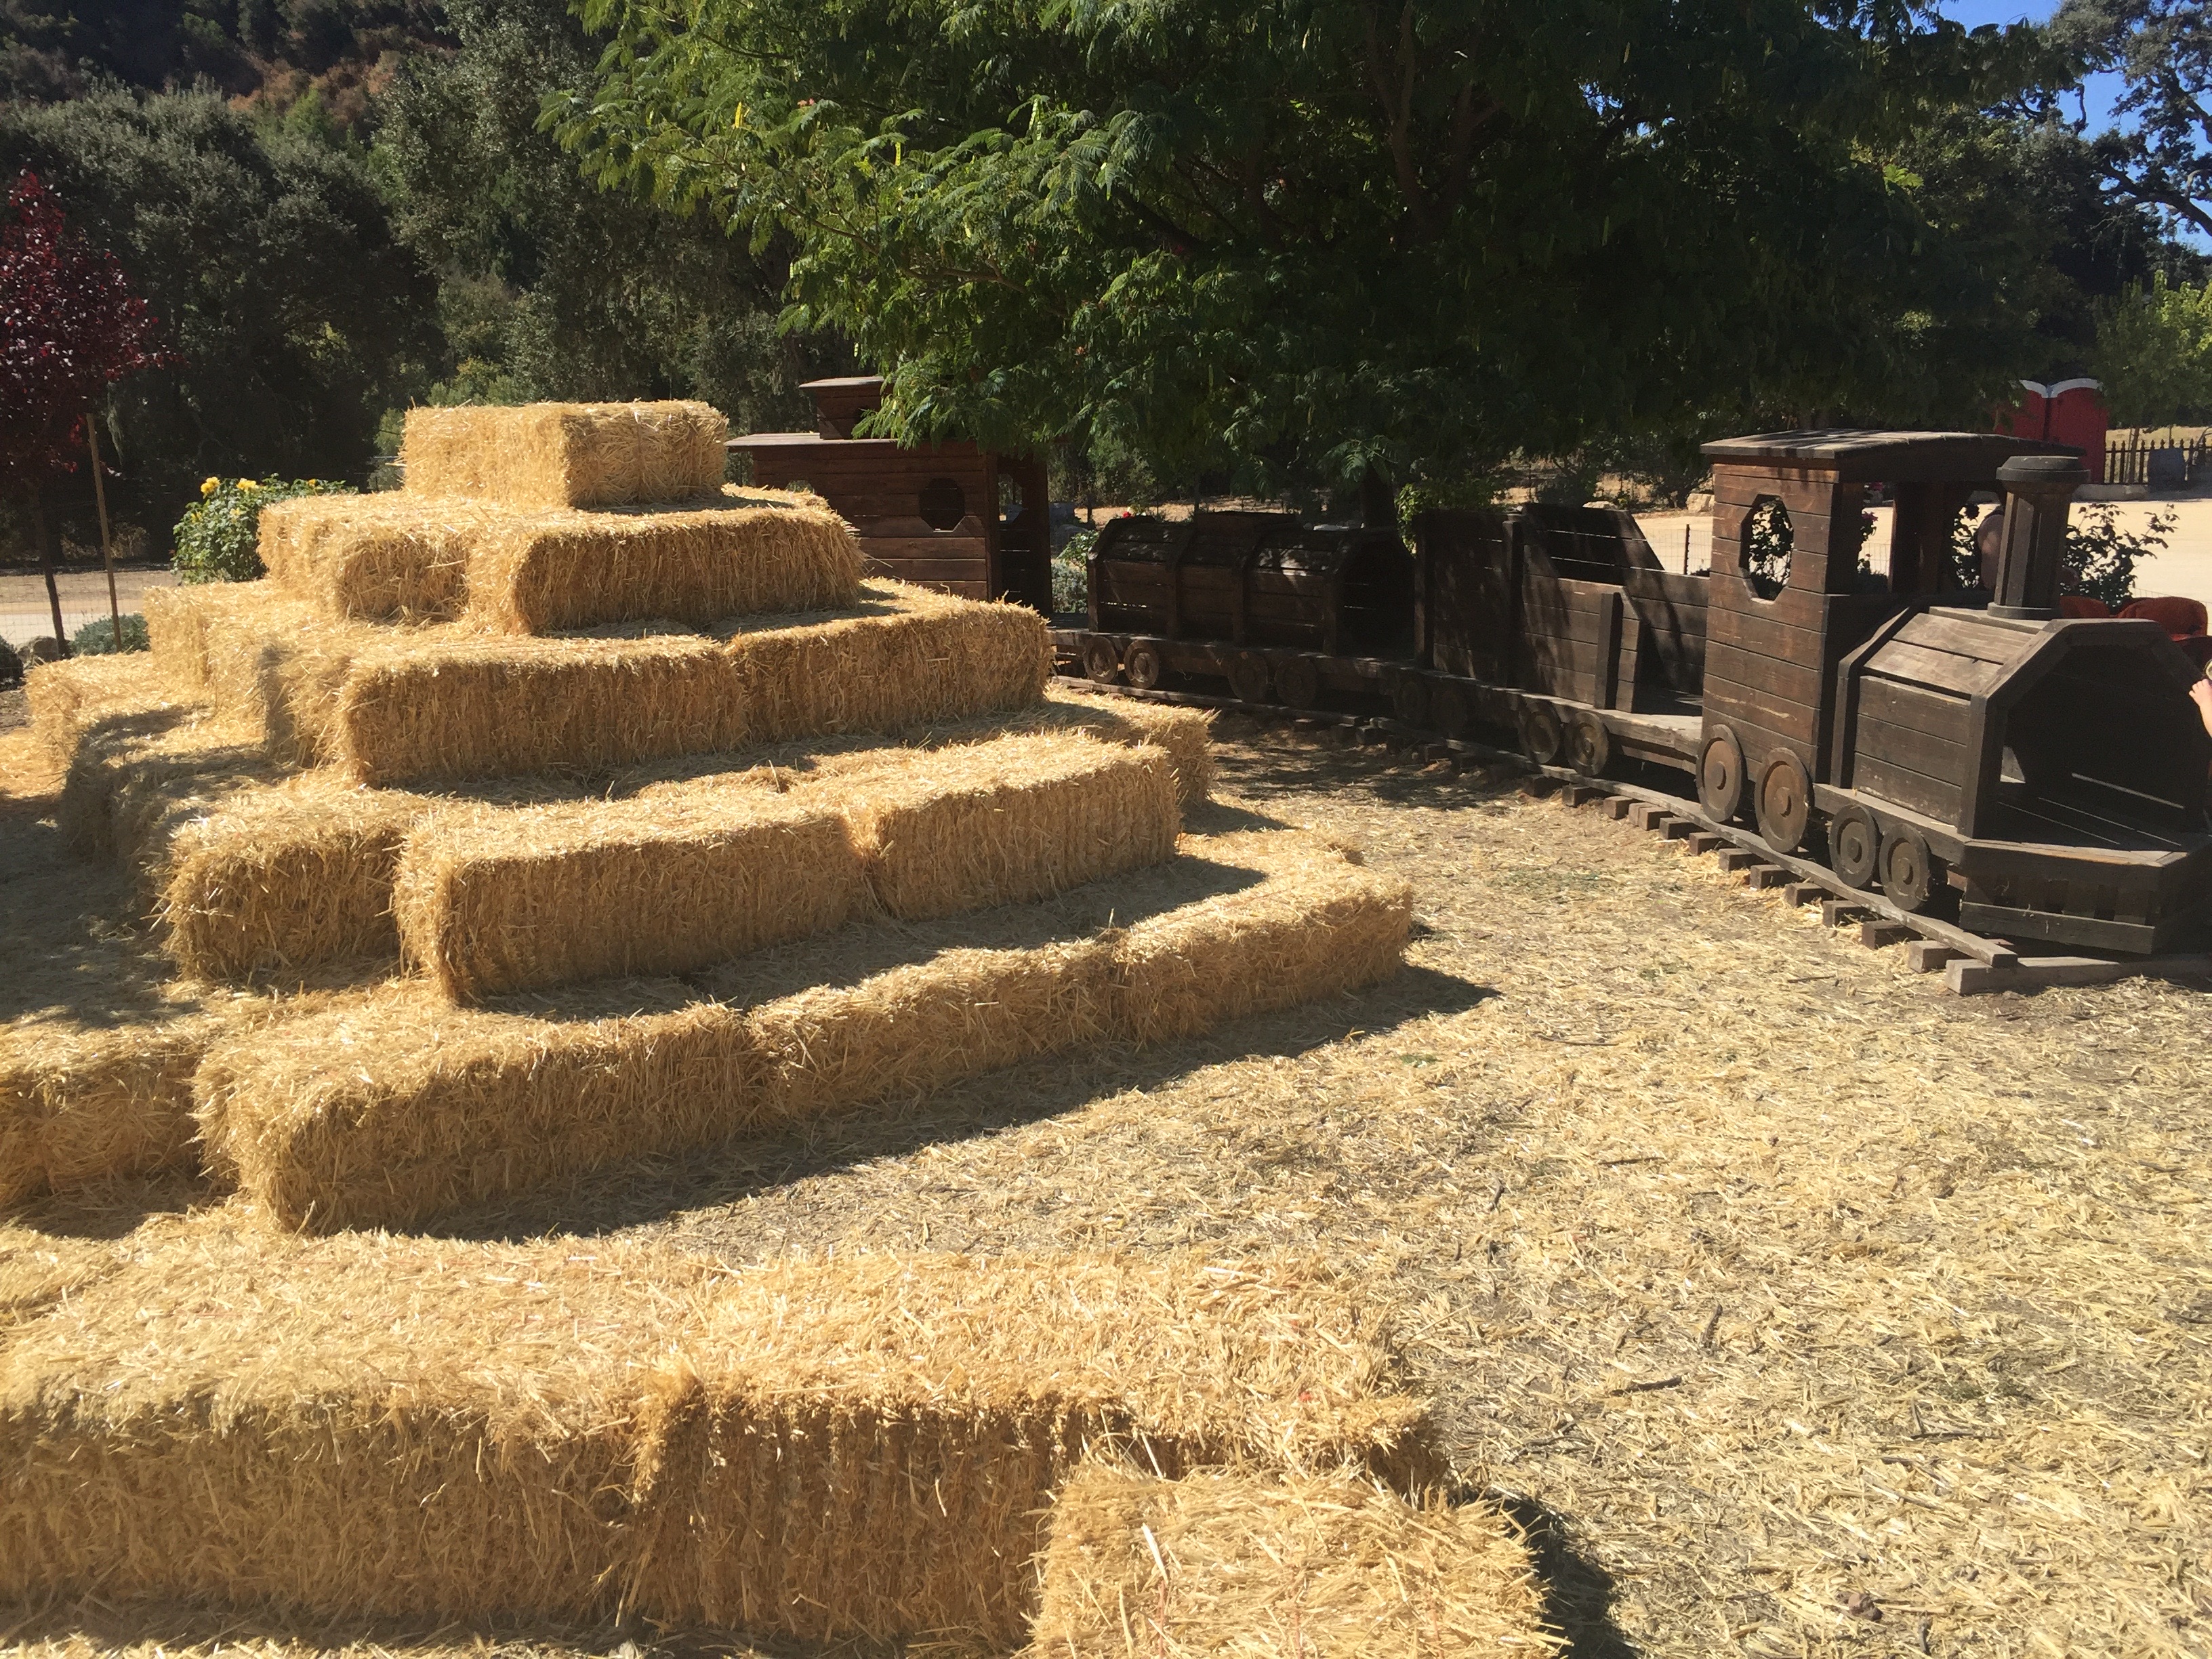 Jack Creek Farms Paso Robles hay tower and wooden train